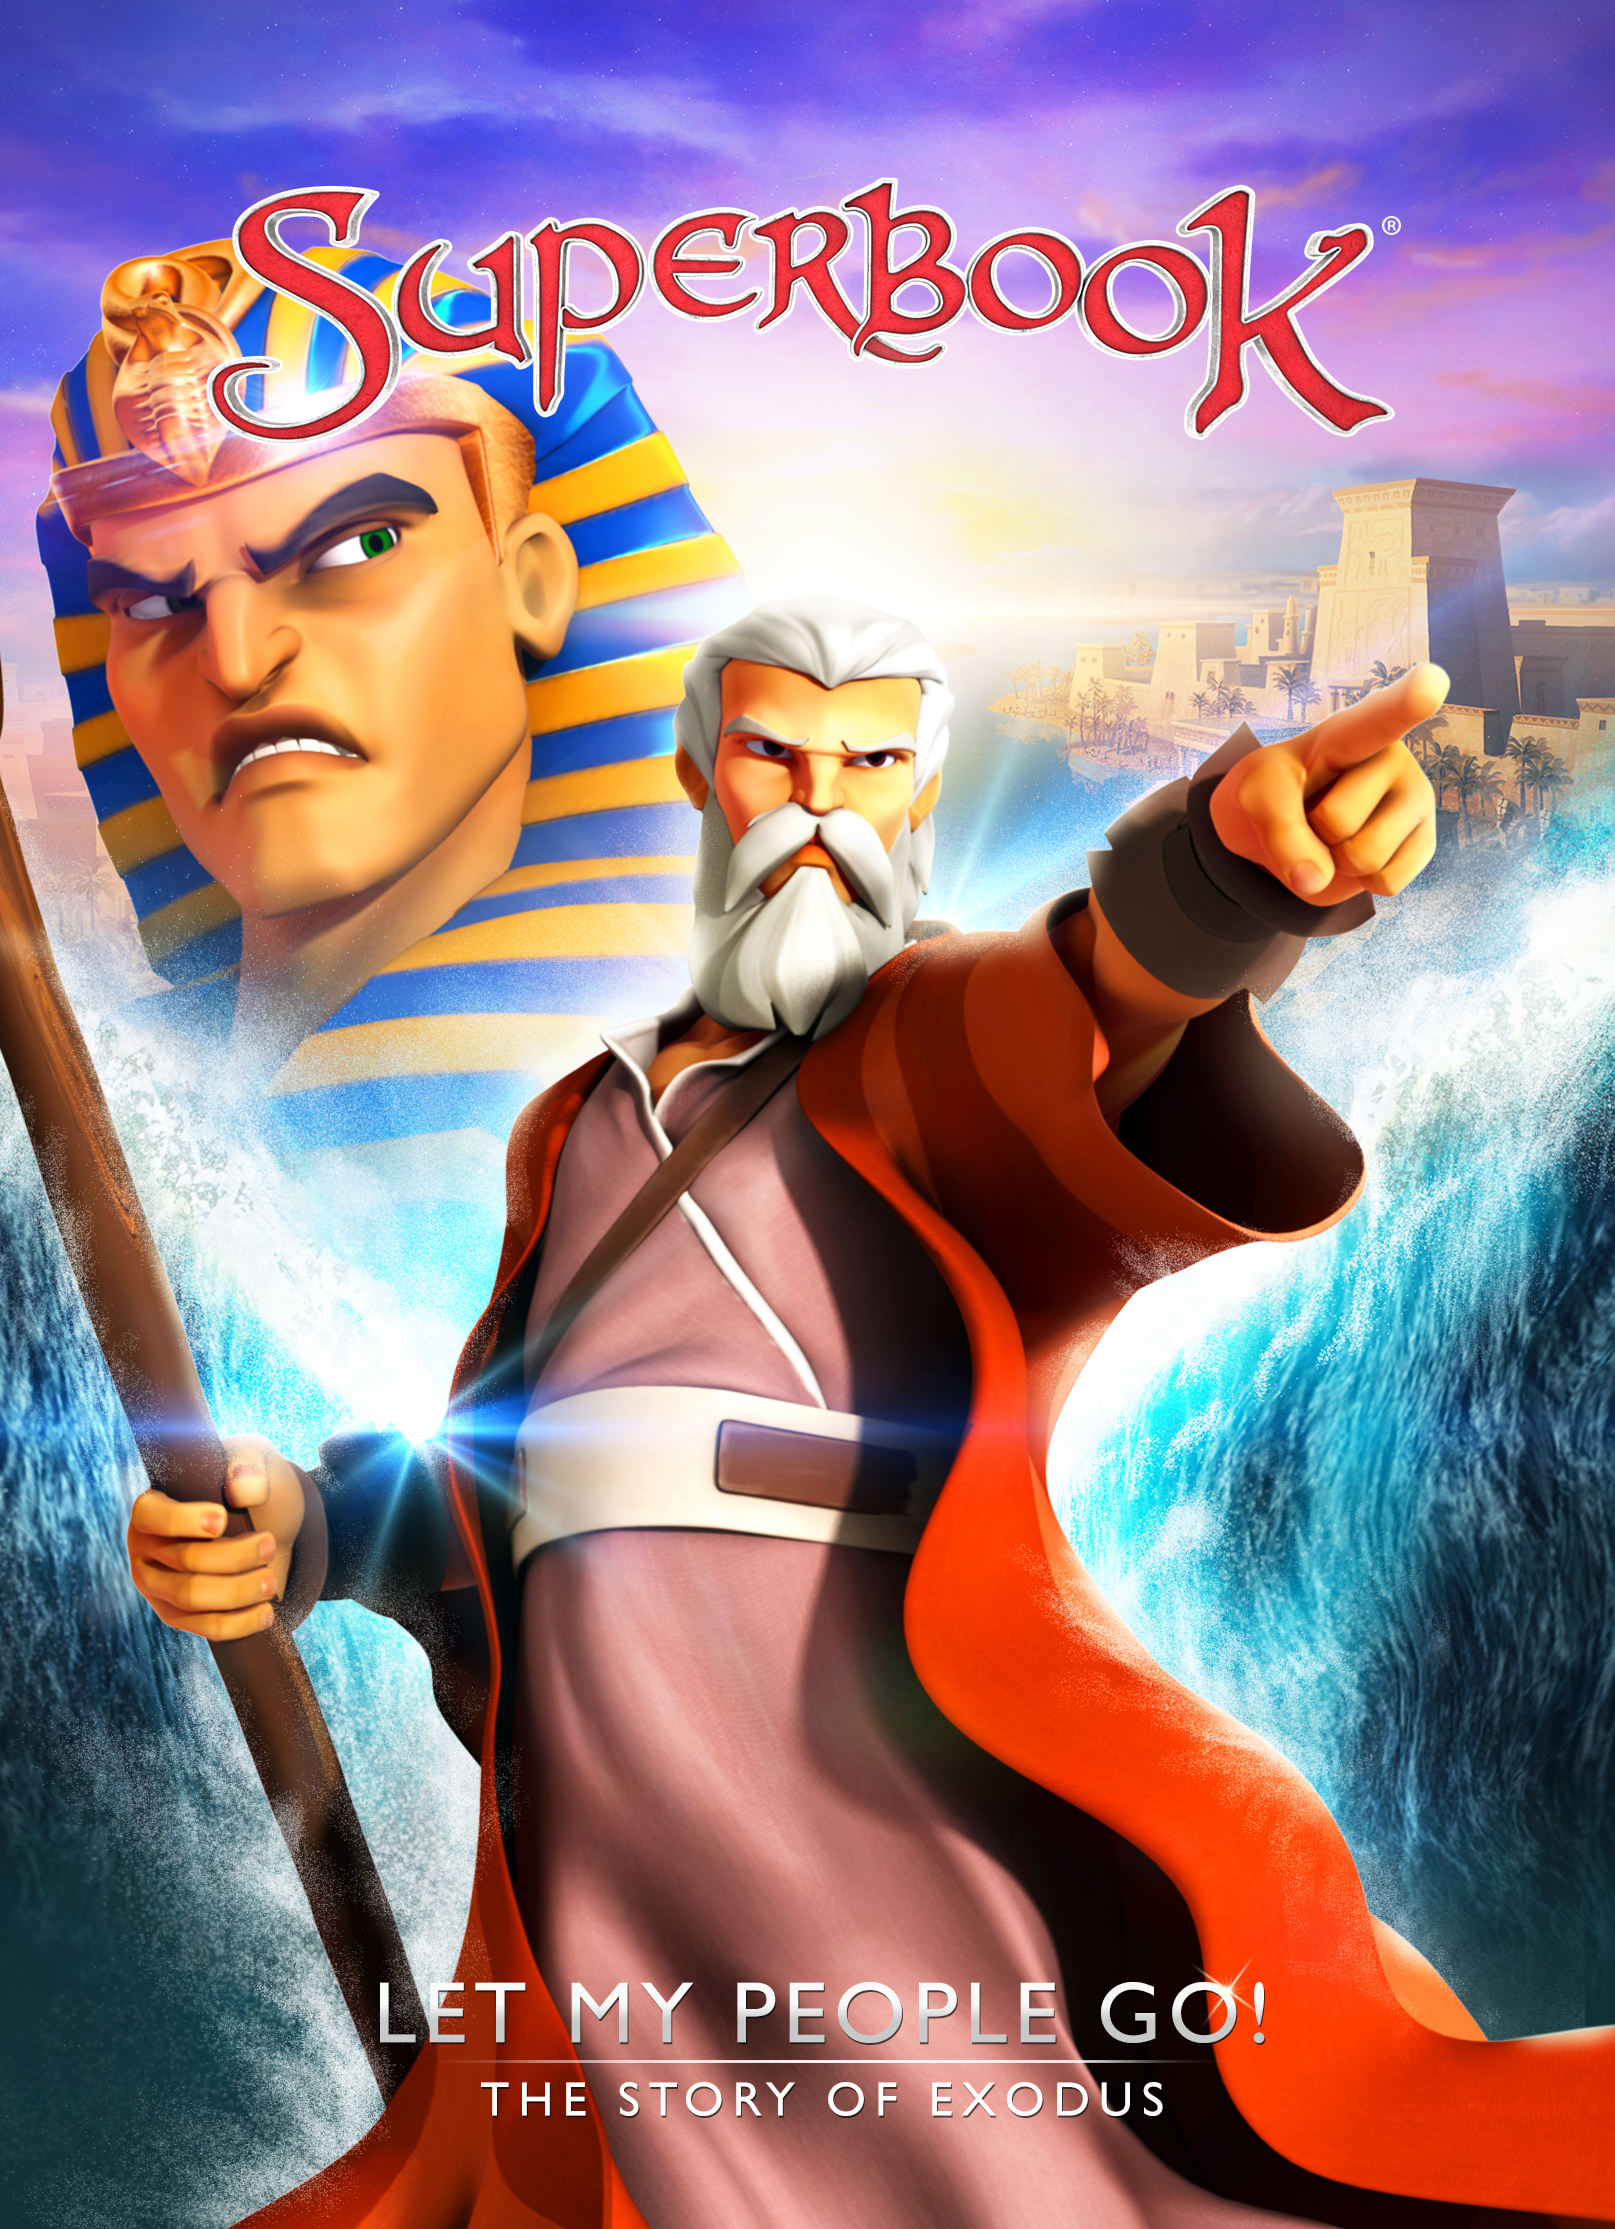 Superbook Episode 104 Let My People Go!: The Story of Exodus